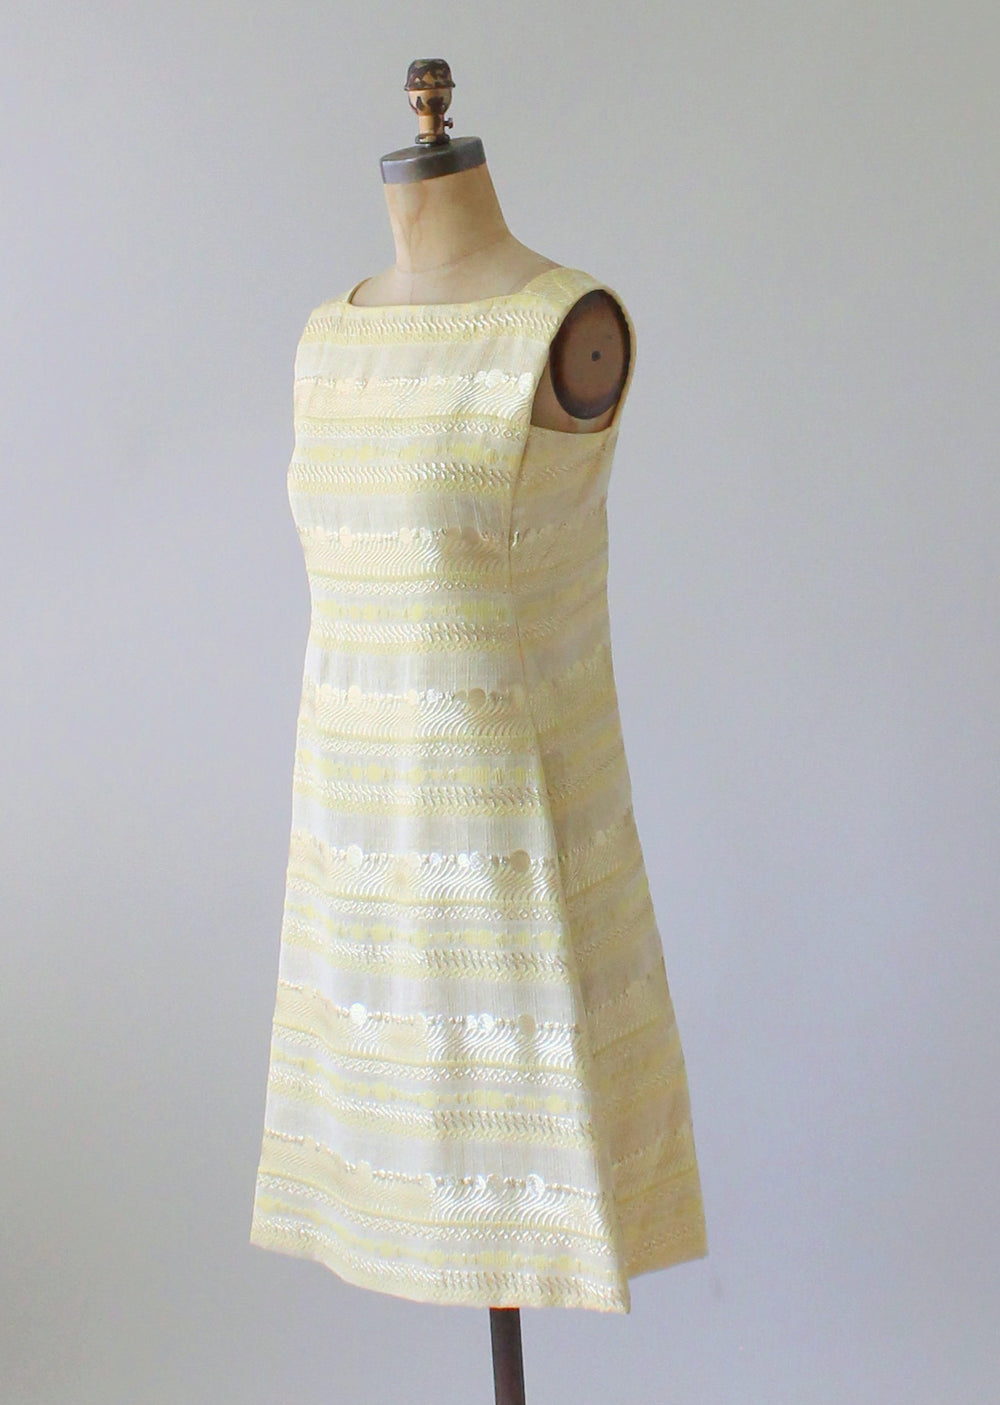 Vintage 1960s Malcolm Starr MOD Gold Lame Party Dress - Raleigh Vintage